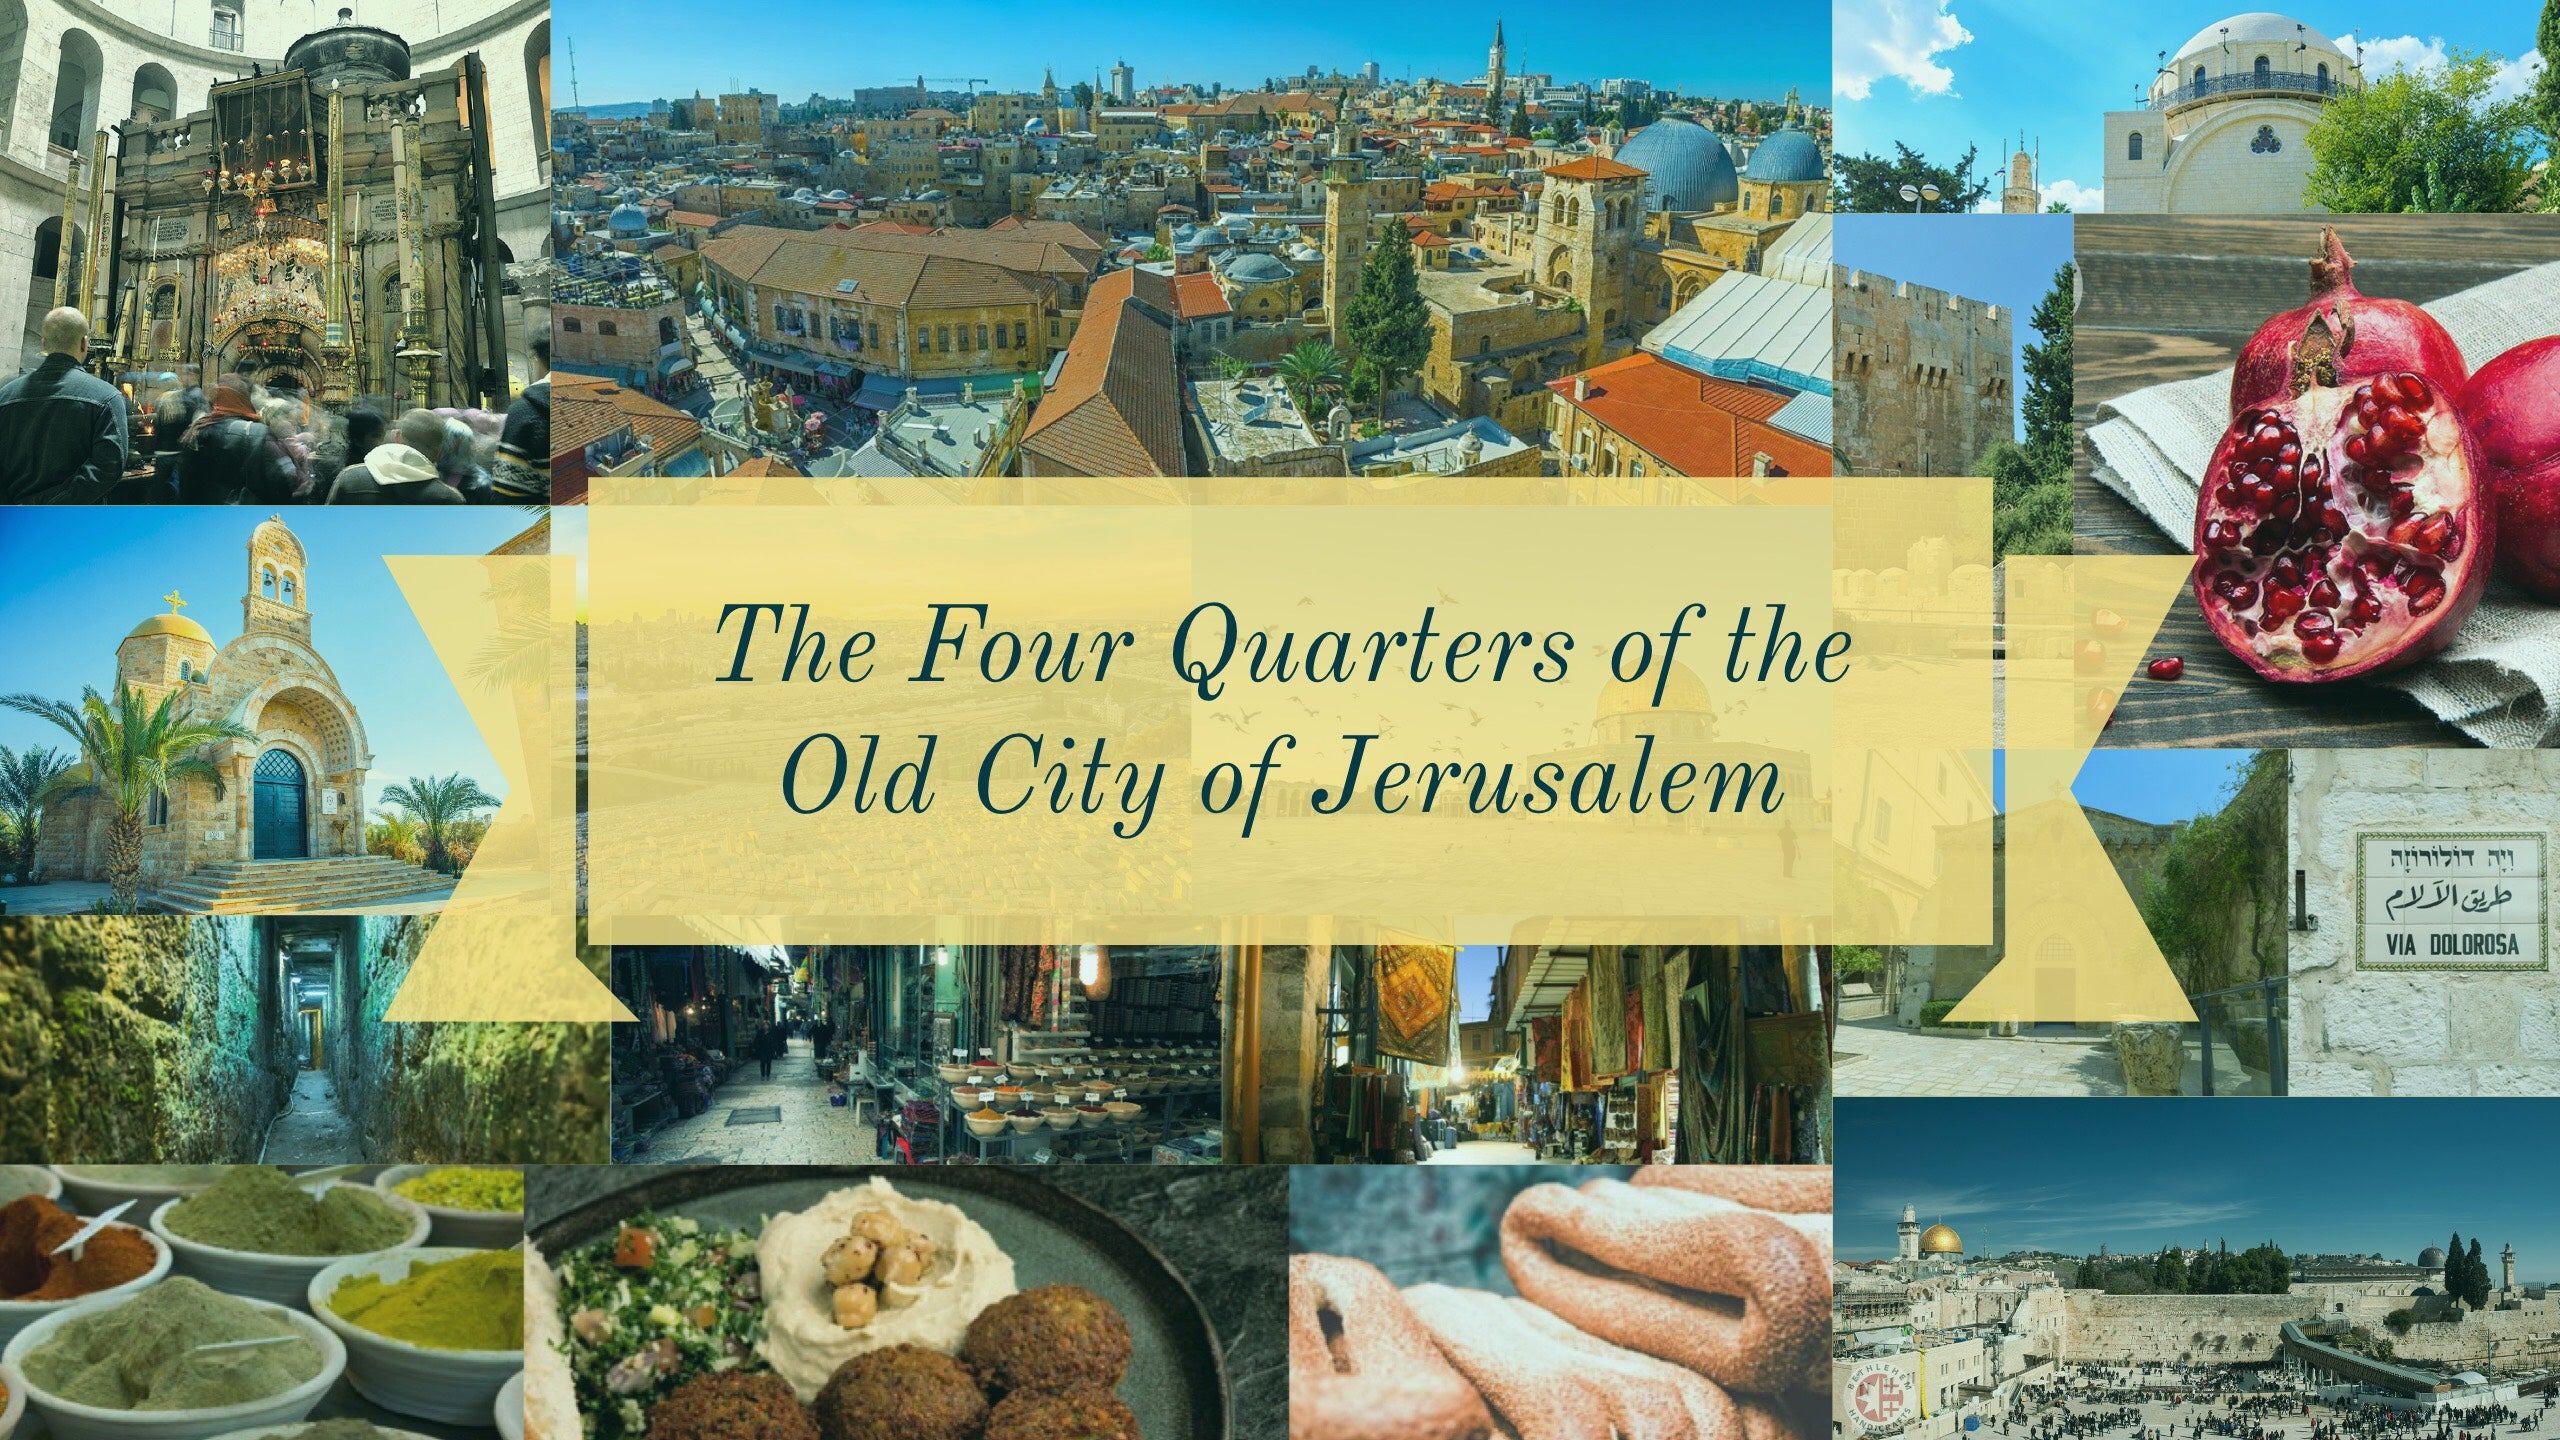 The Four Quarters of the Old City of Jerusalem